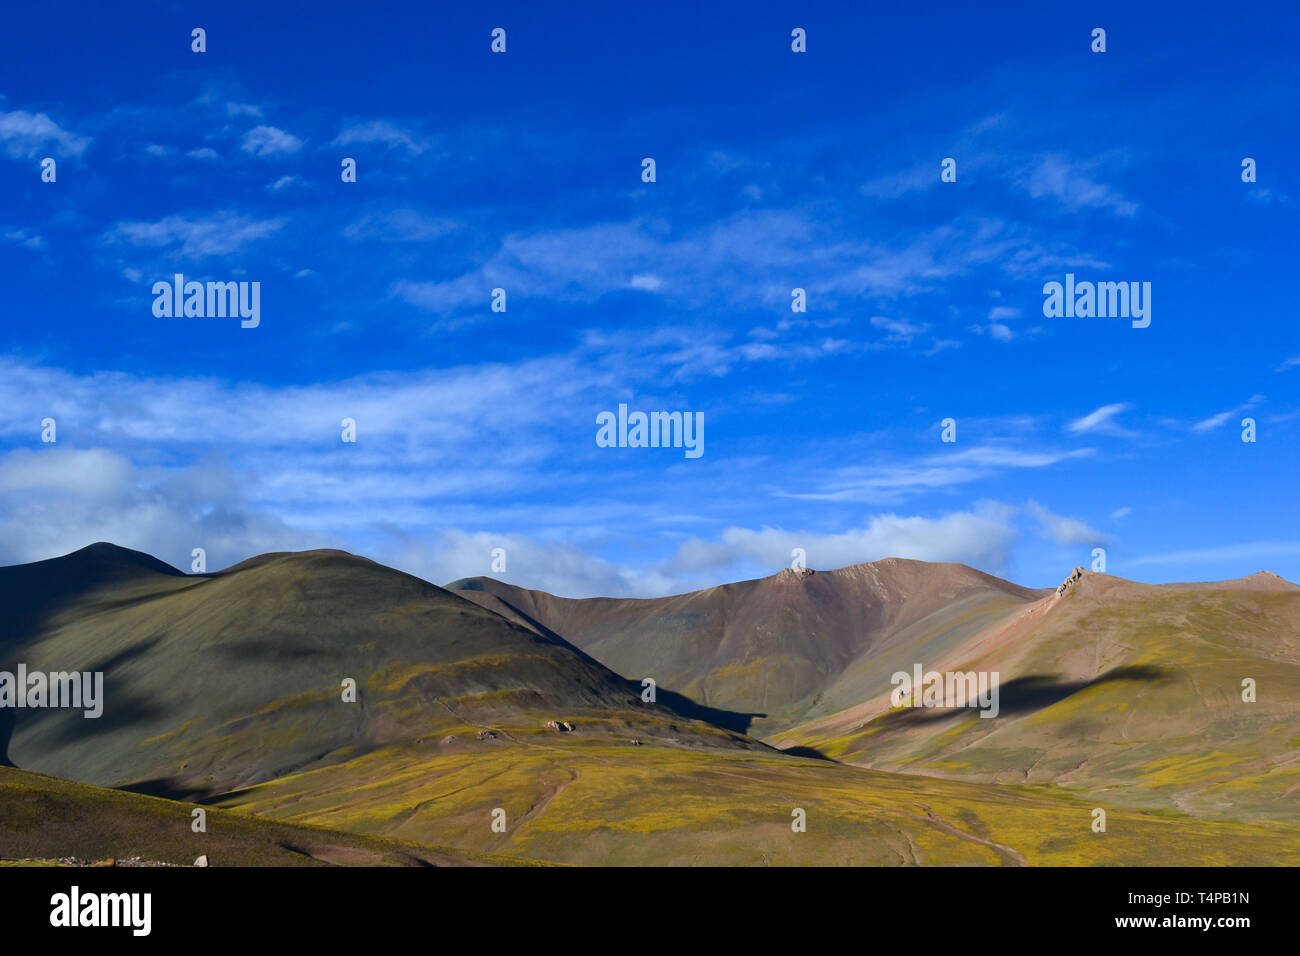 The landscape of Tibetan Plateau in Tibet, China Stock Photo